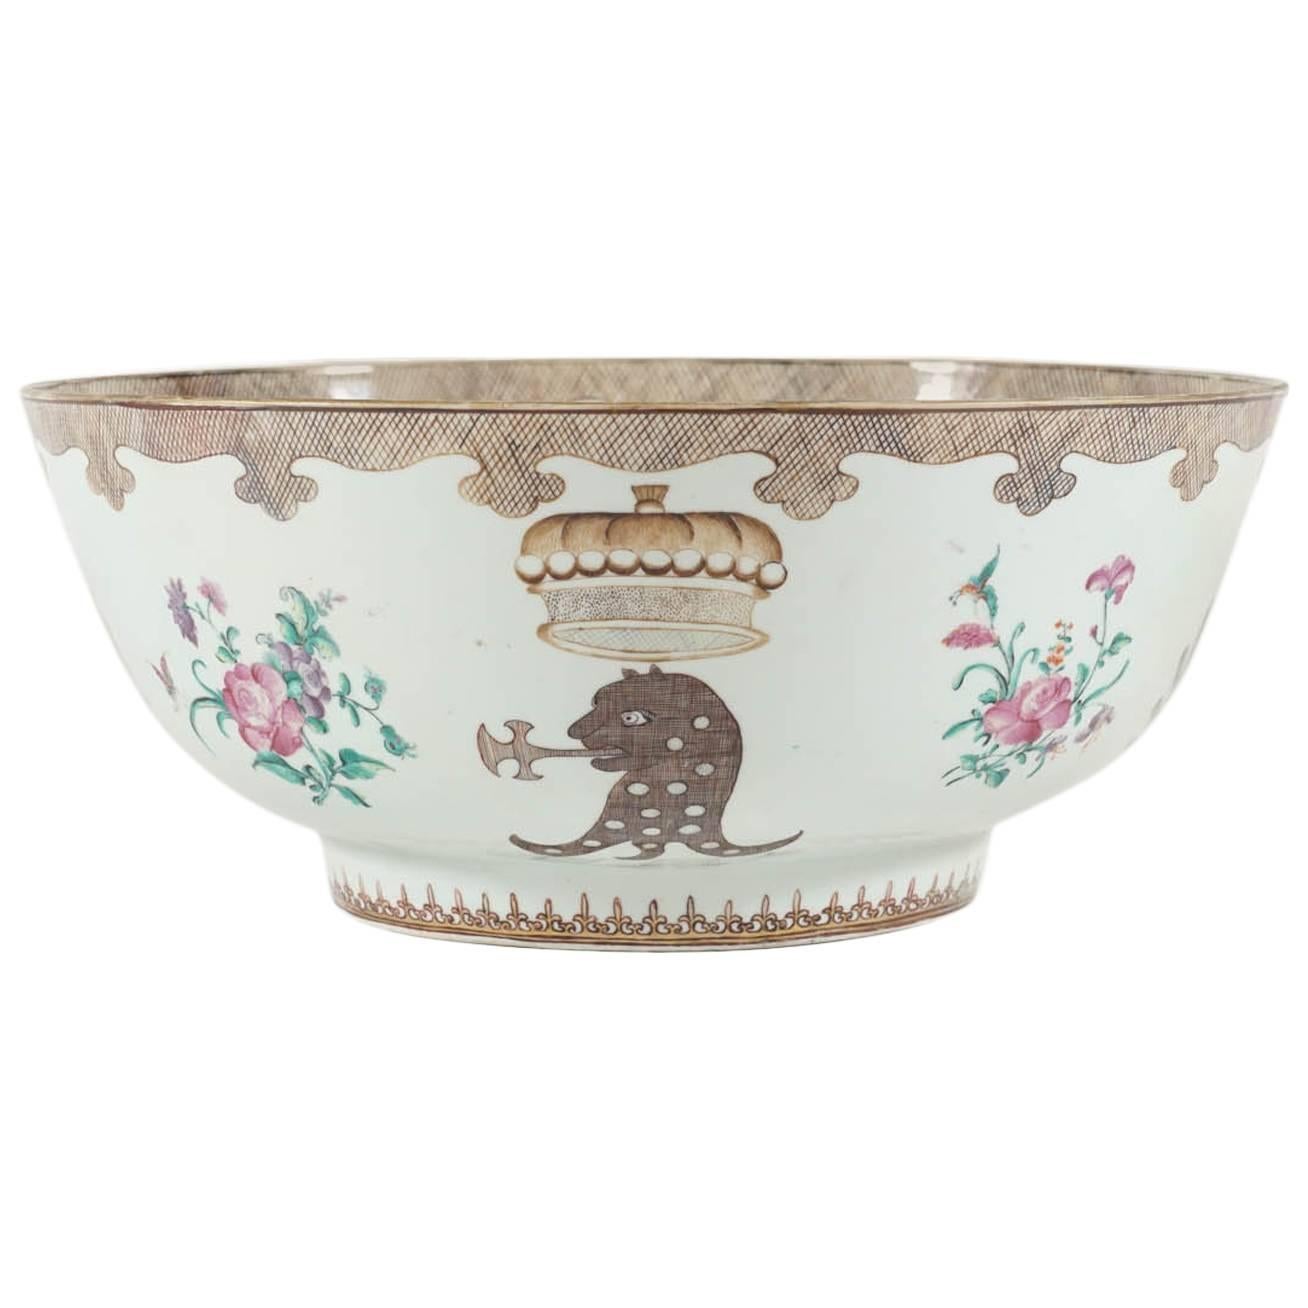 The Pleydell-Bouverie Family Punch Bowl, Chinese Export, circa 1750